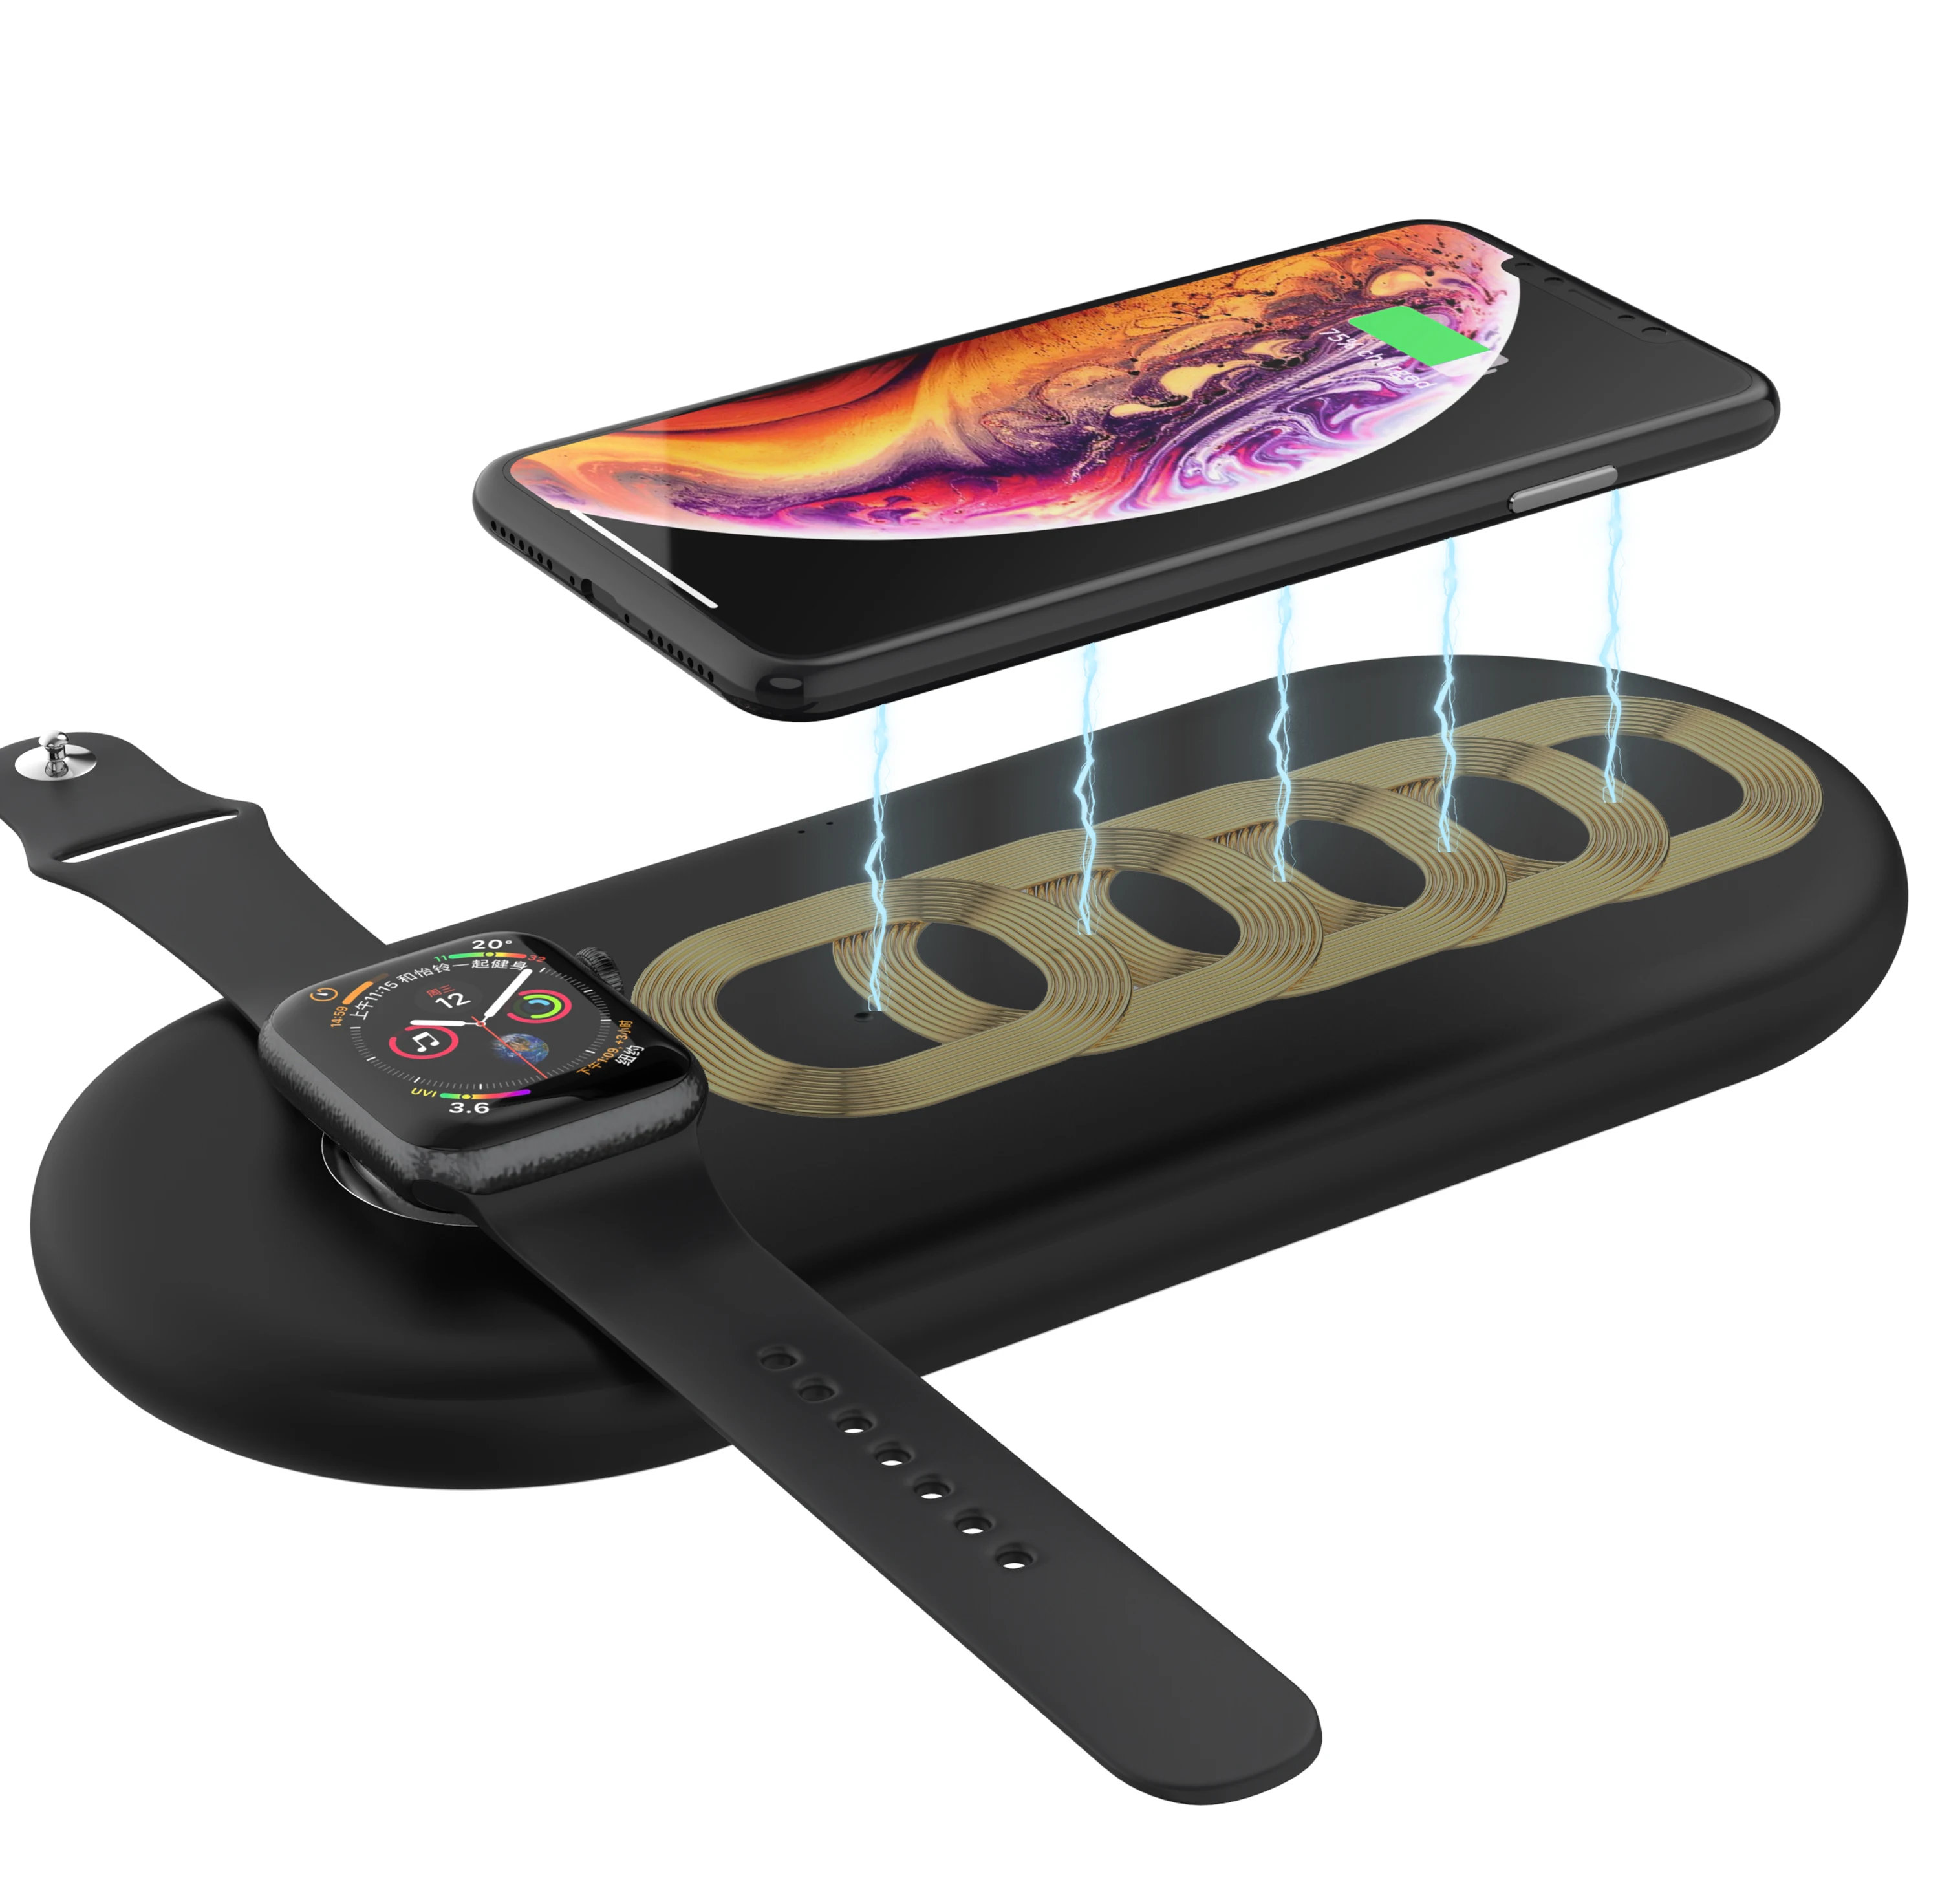 
best selling products 2020 in usa amazon qi watch charge pad wireless charger stand 3 in 1 wireless charging dock station 